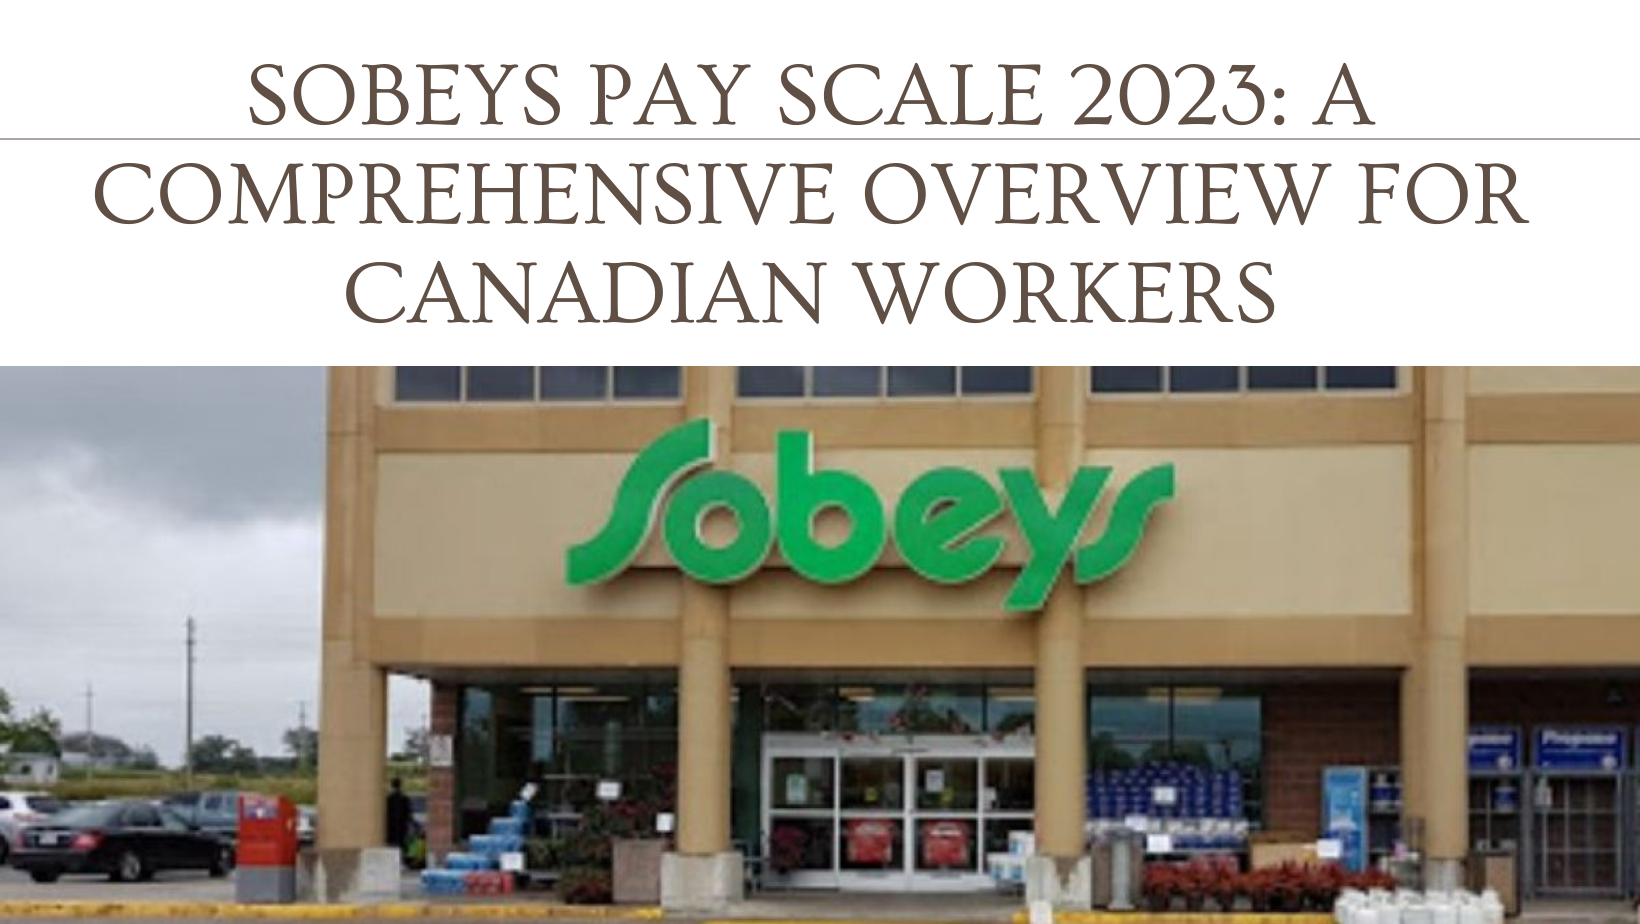 Sobeys Pay Scale 2023 A Comprehensive Overview for Canadian Workers